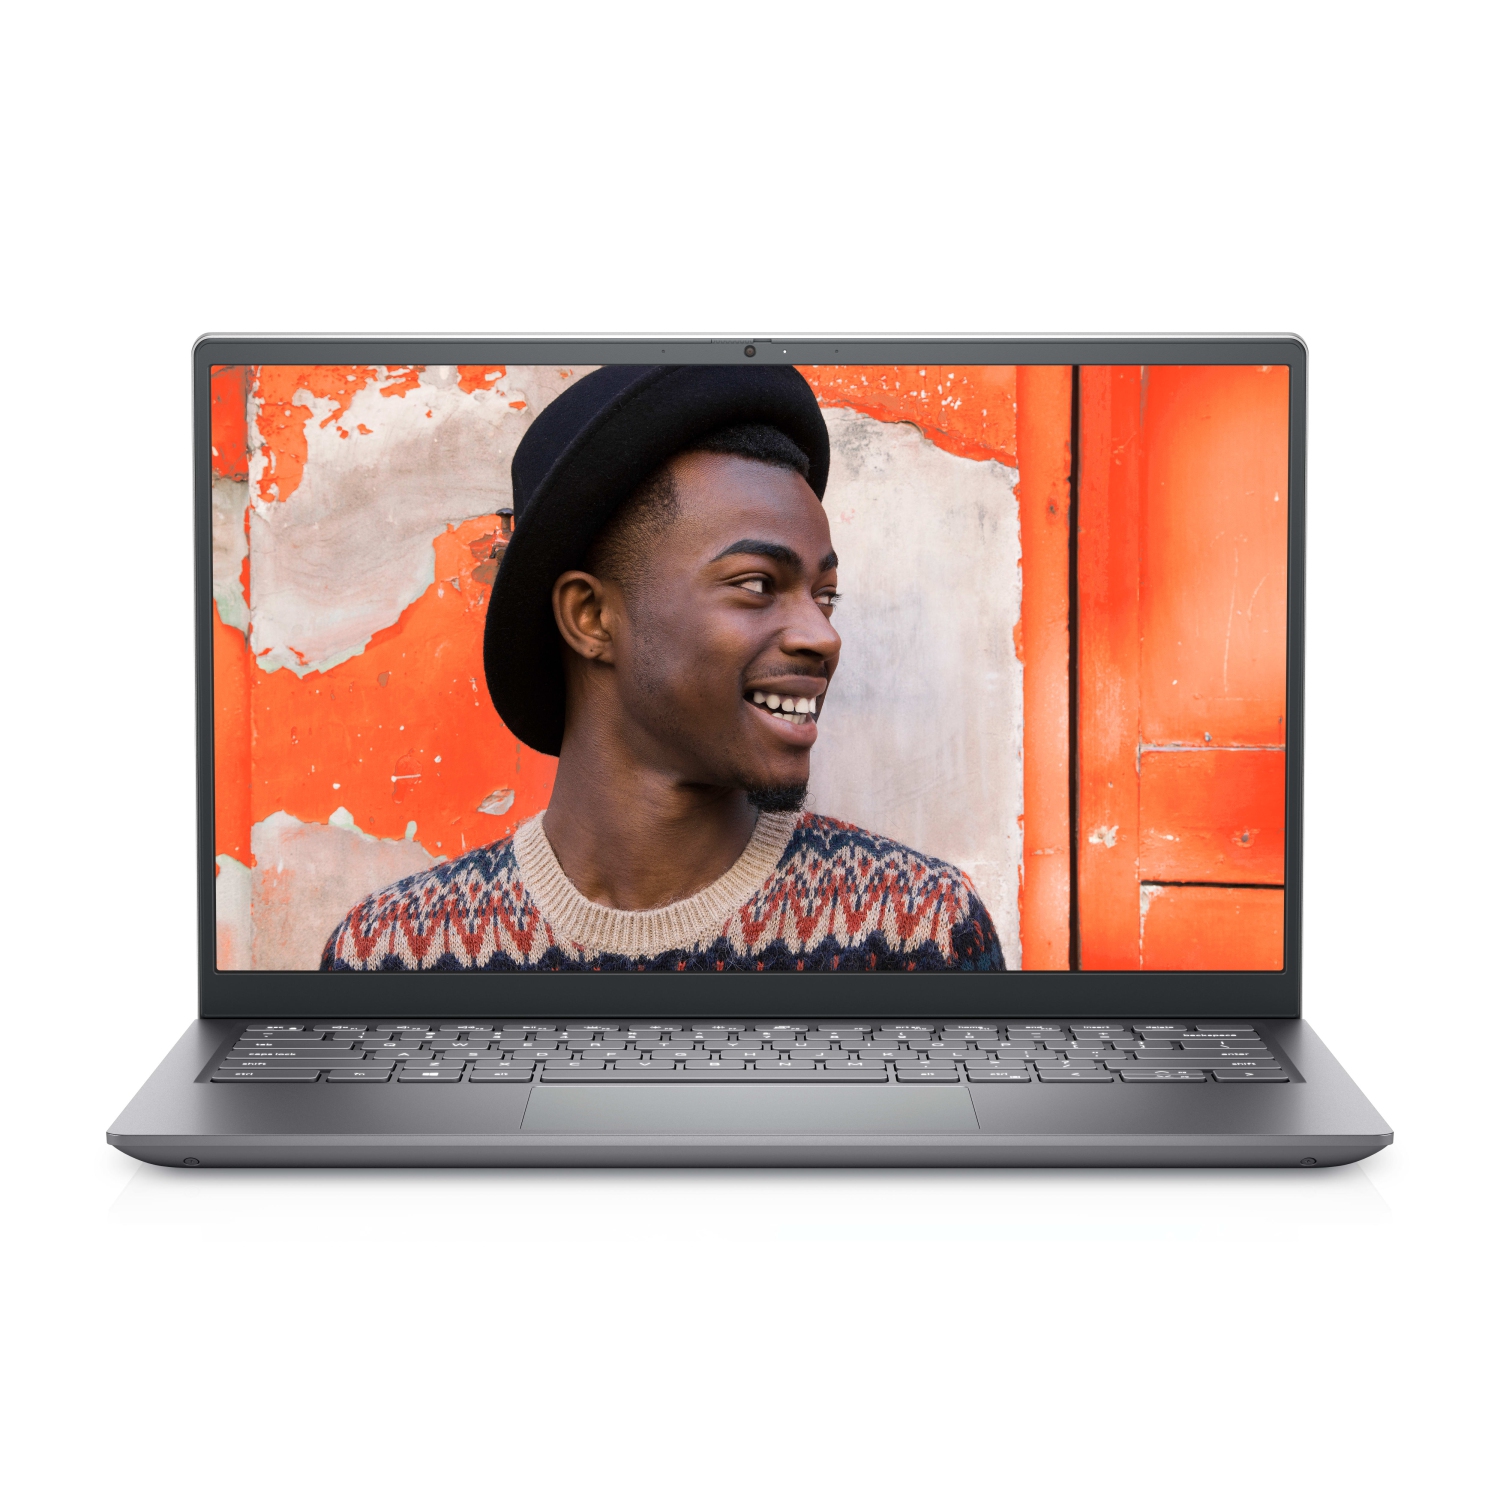 Refurbished (Excellent) – Dell Inspiron 5410 Laptop (2021) | 14" FHD | Core i7 - 1TB SSD - 12GB RAM | 4 Cores @ 4.8 GHz - 11th Gen CPU